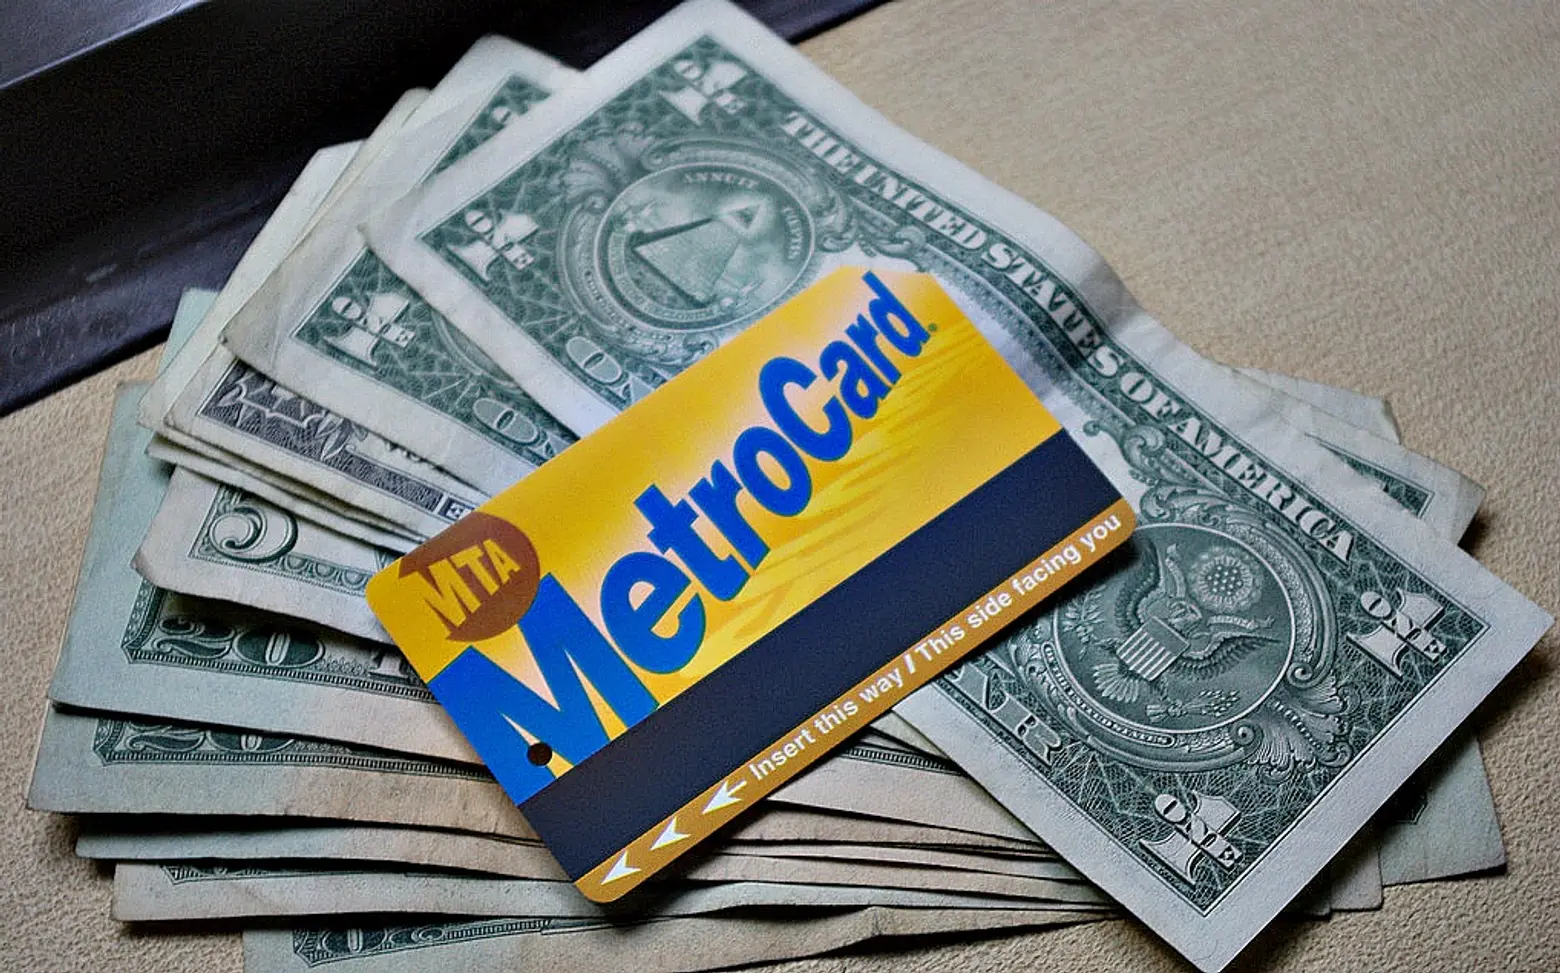 MTA set to hike fares next year, despite poor service and fewer riders